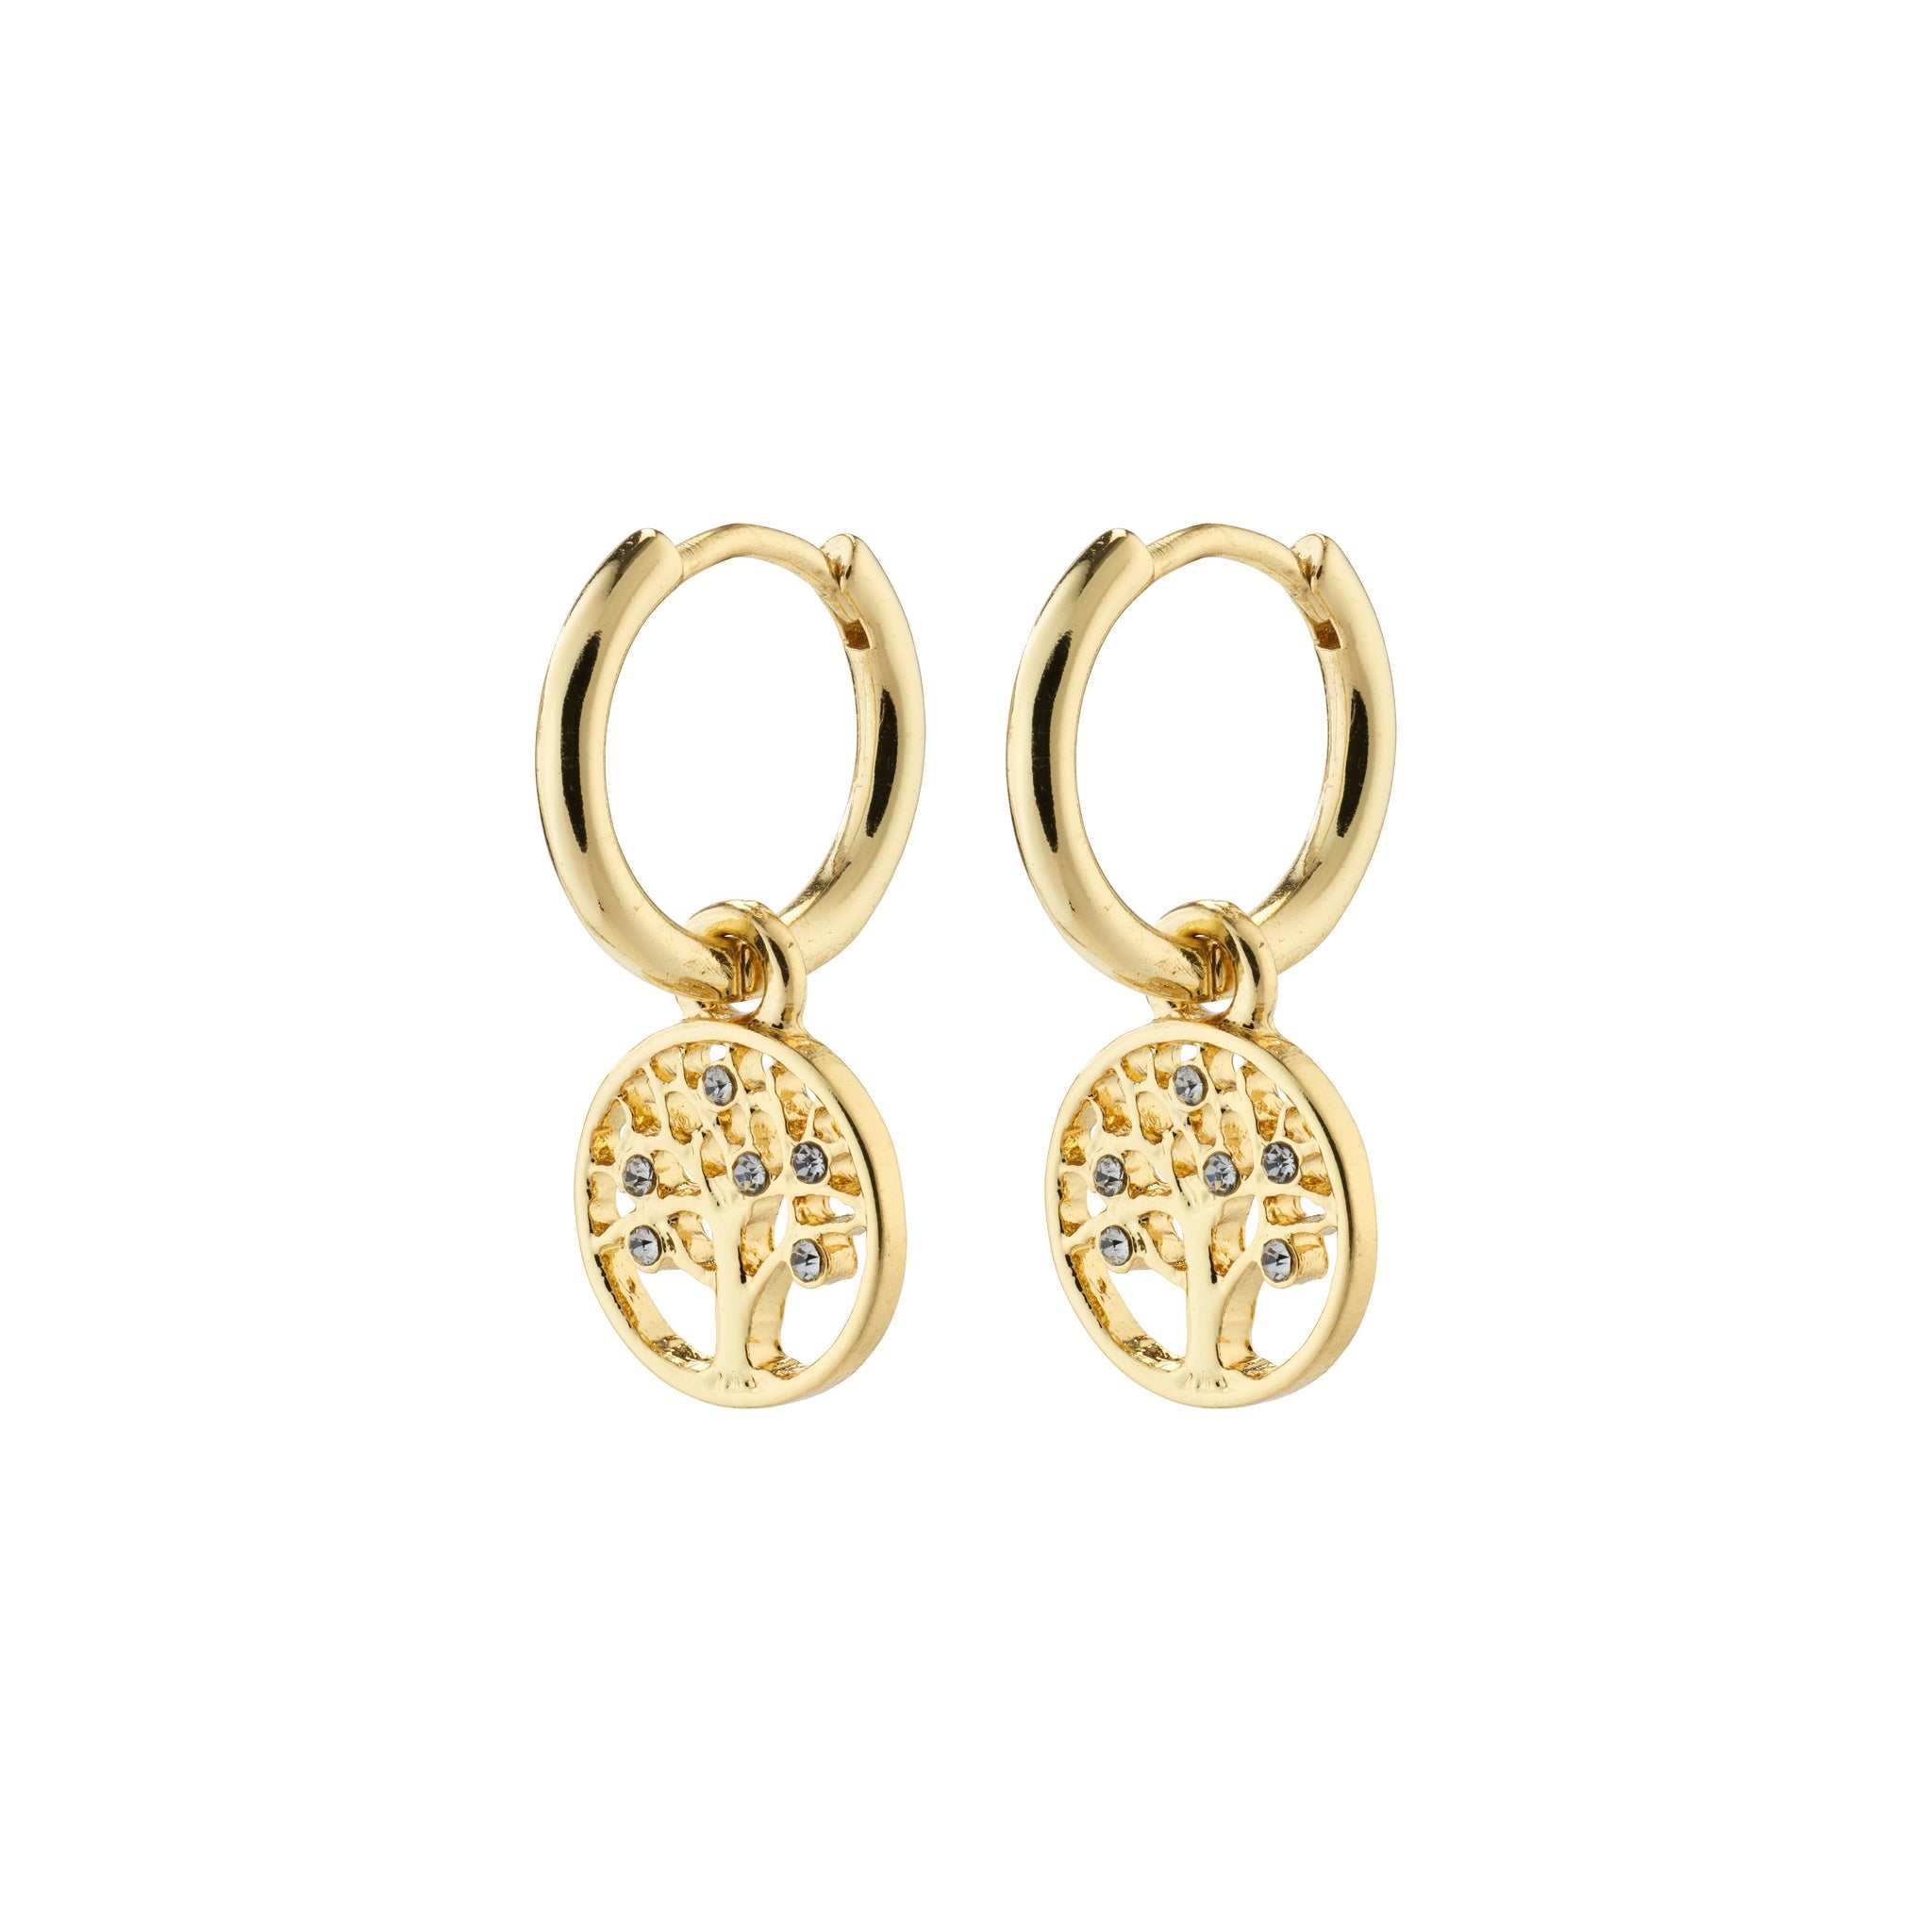 IBEN Recycled Tree of Life Hoop Earrings - Gold Plated